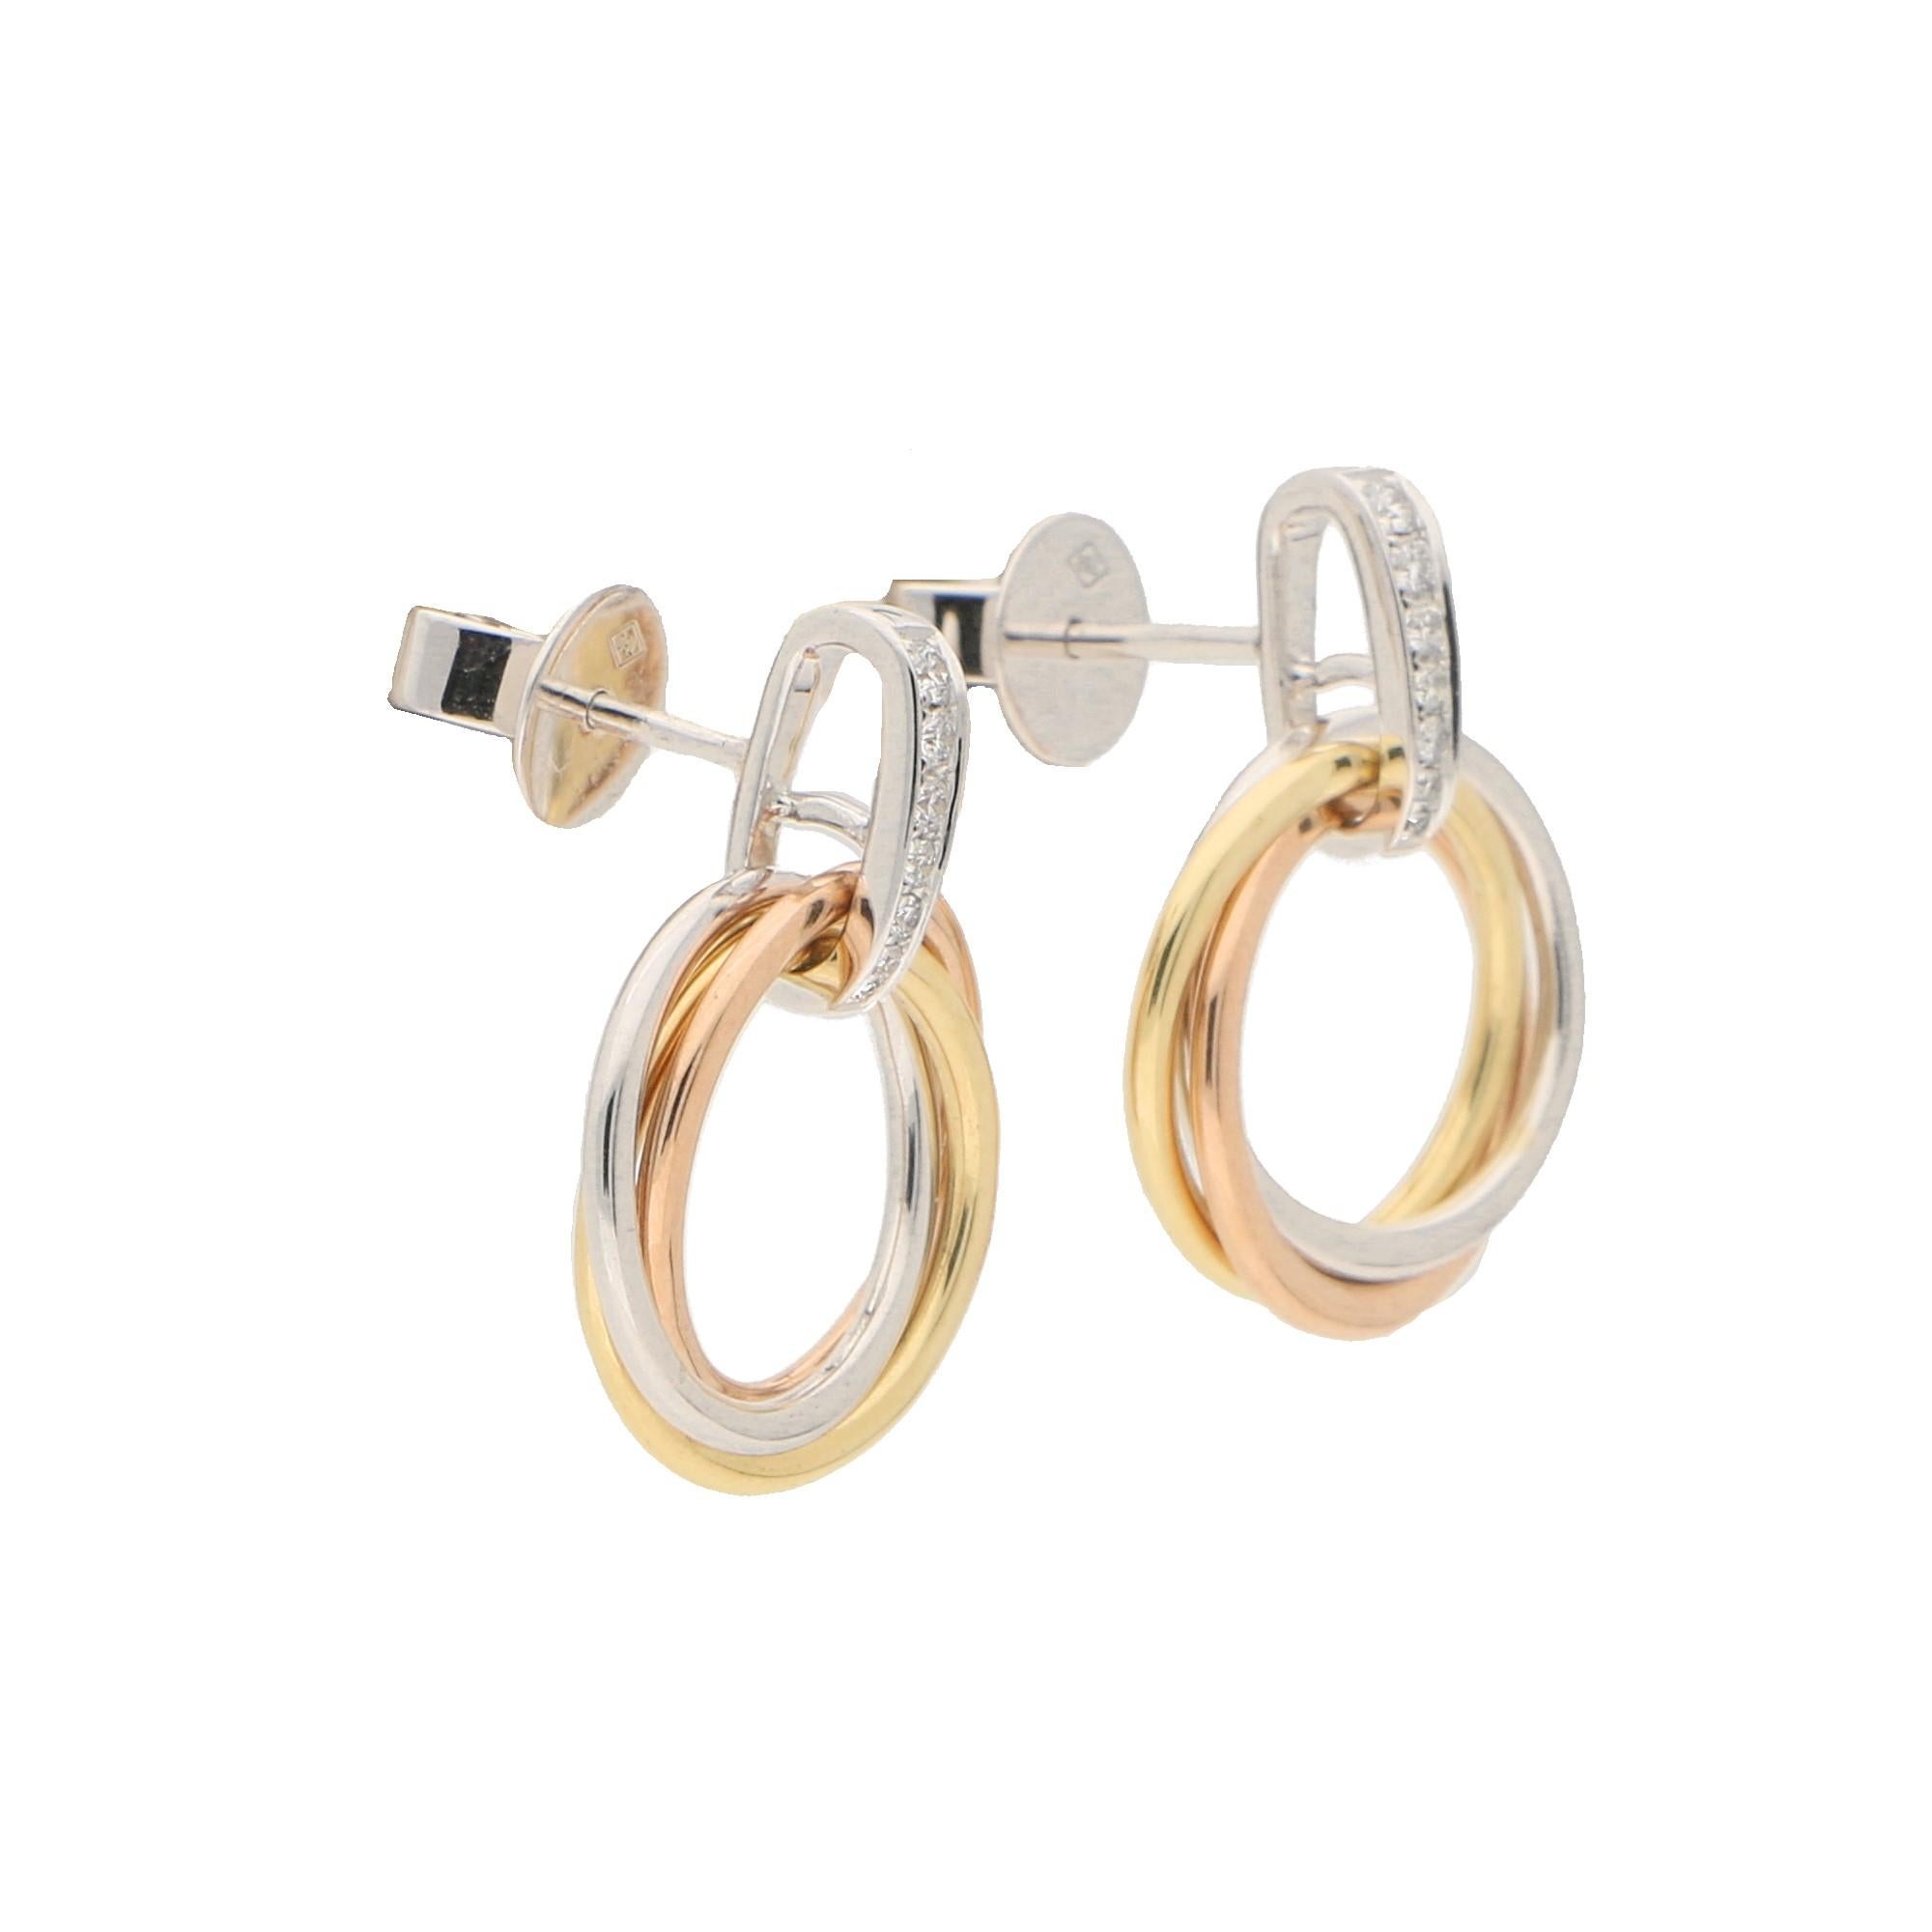 A lovely little pair of modern style trinity drop earrings set in 18k yellow, rose and white gold. 

The earrings are composed of three intertwined tricoloured gold hoops. These hoops are locked into their trinity style by a pavé set white gold